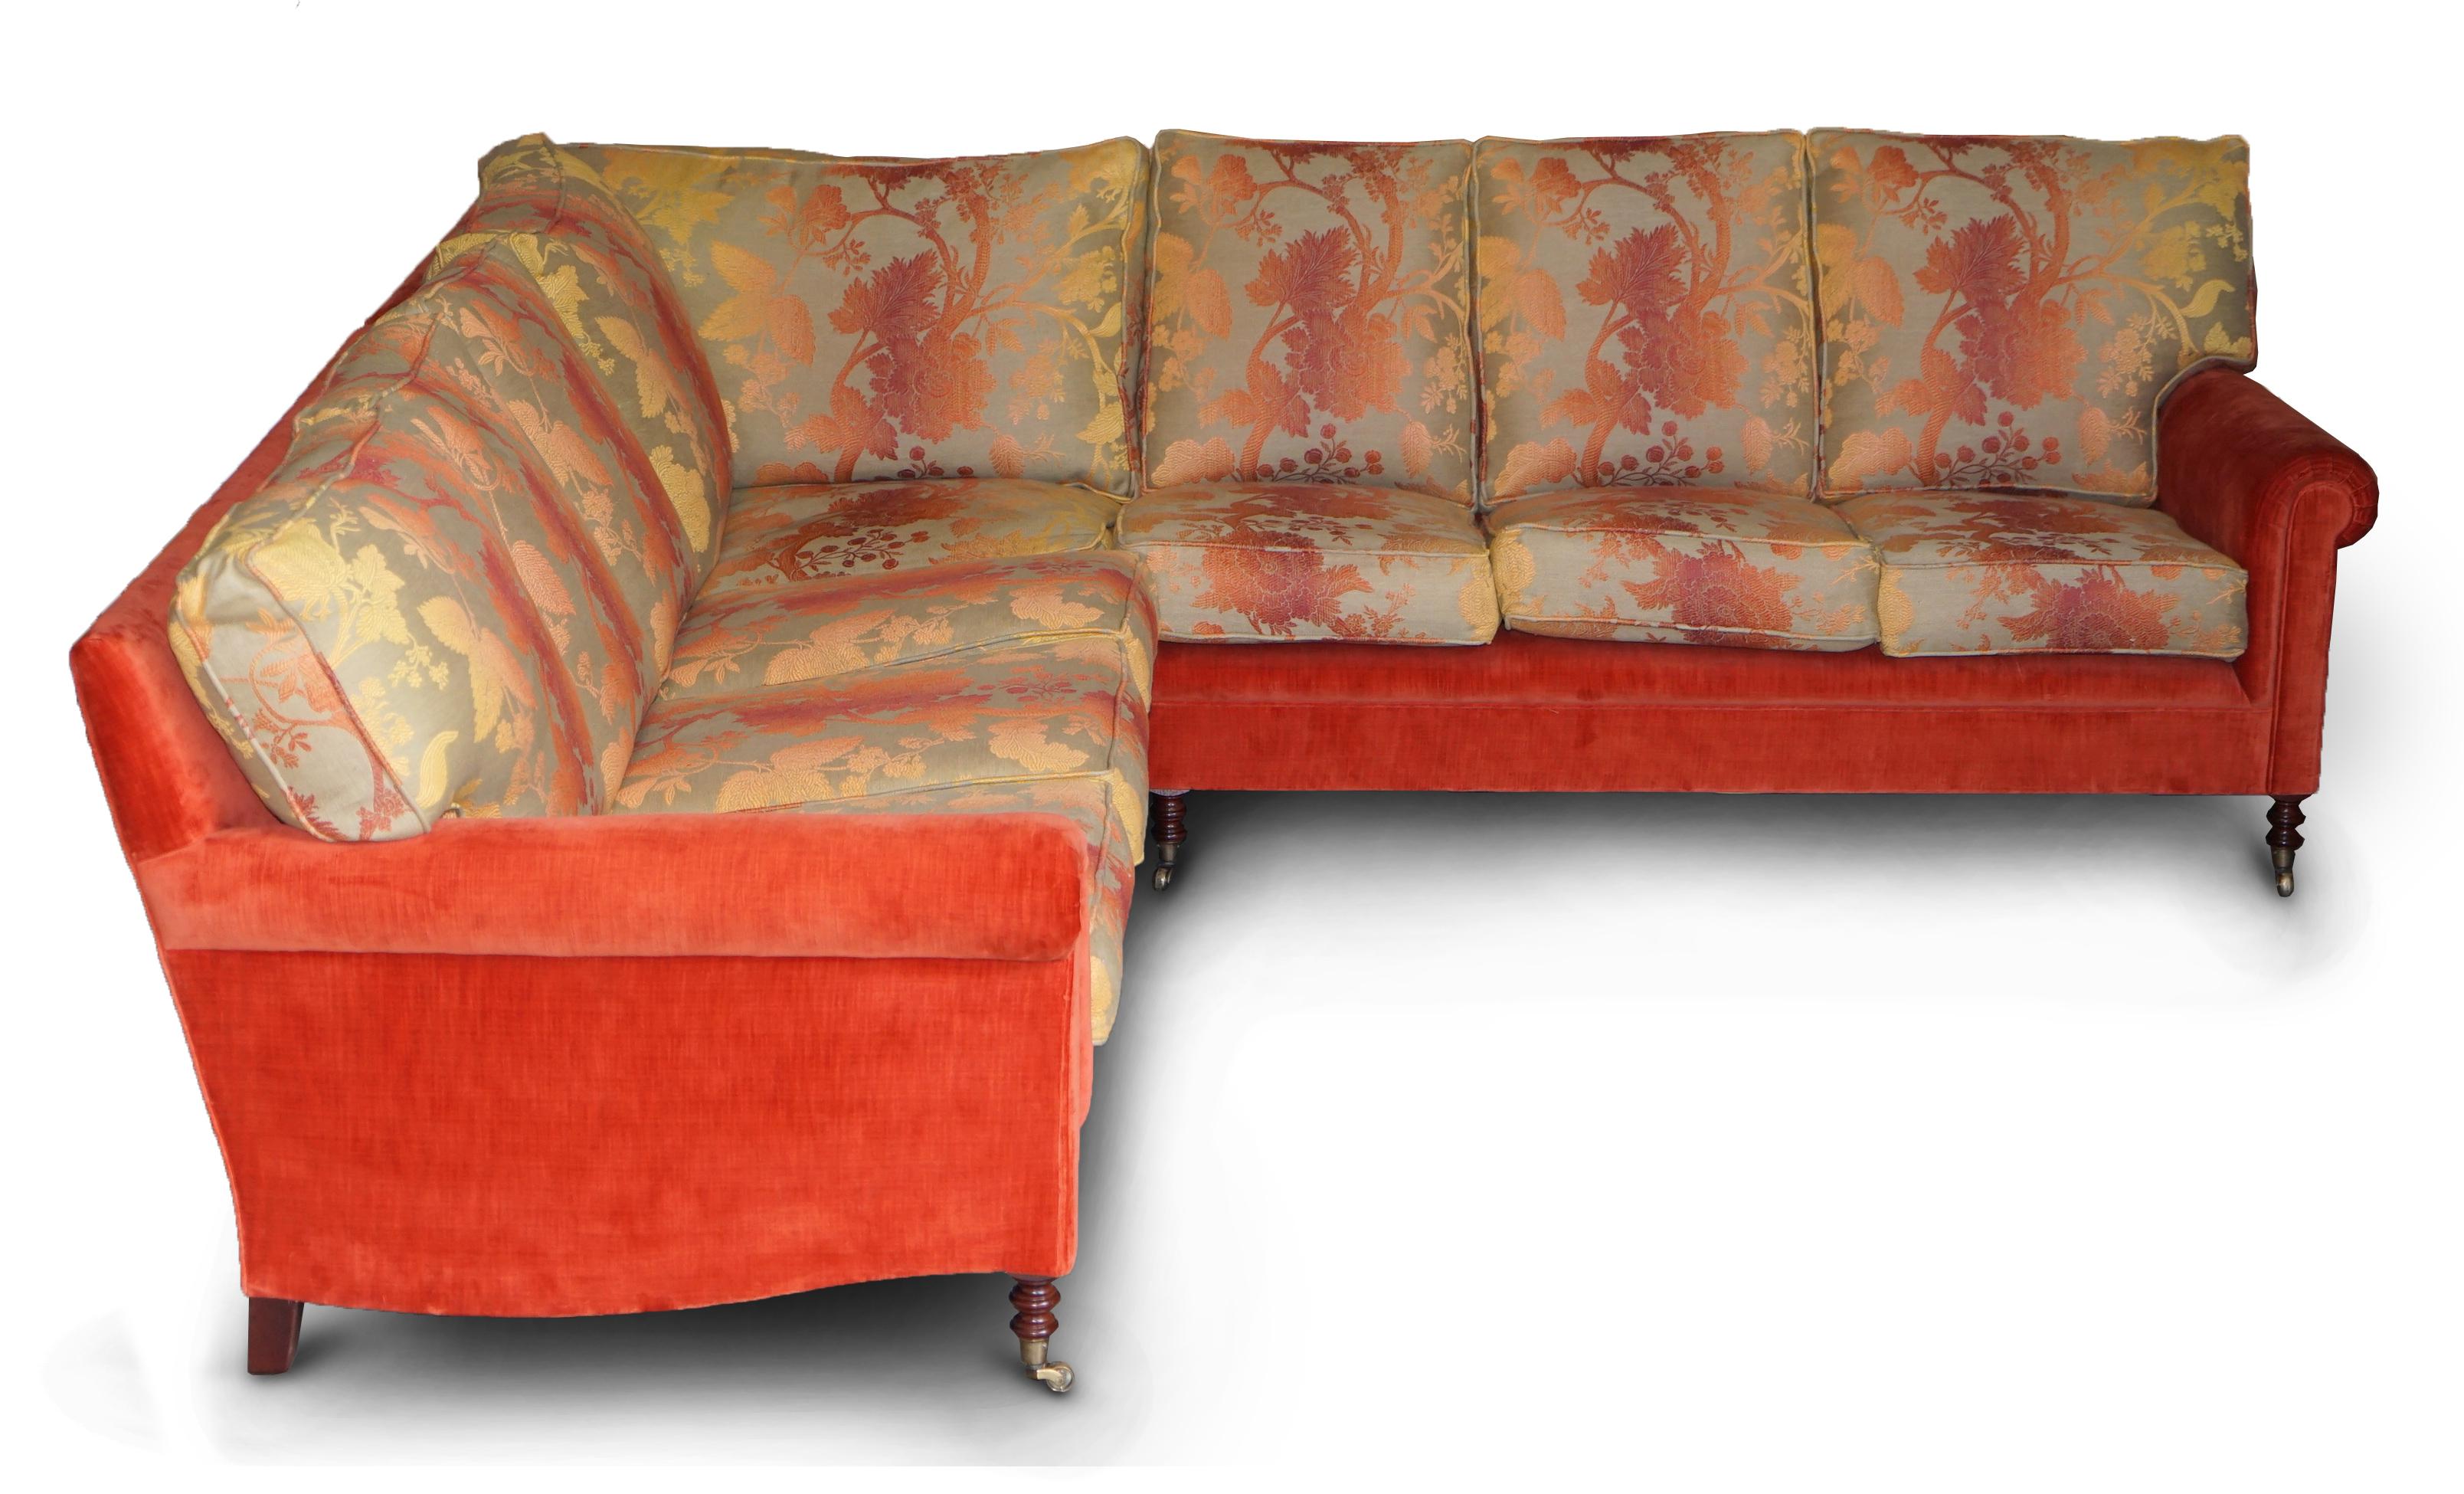 We are delighted to offer for sale this rare George Smith Signature full scroll arm corner sofa that seats up to seven people

Well.. where to begin, what a sofa! This piece is simply put amazing, anything made by George Smith is the finest hand